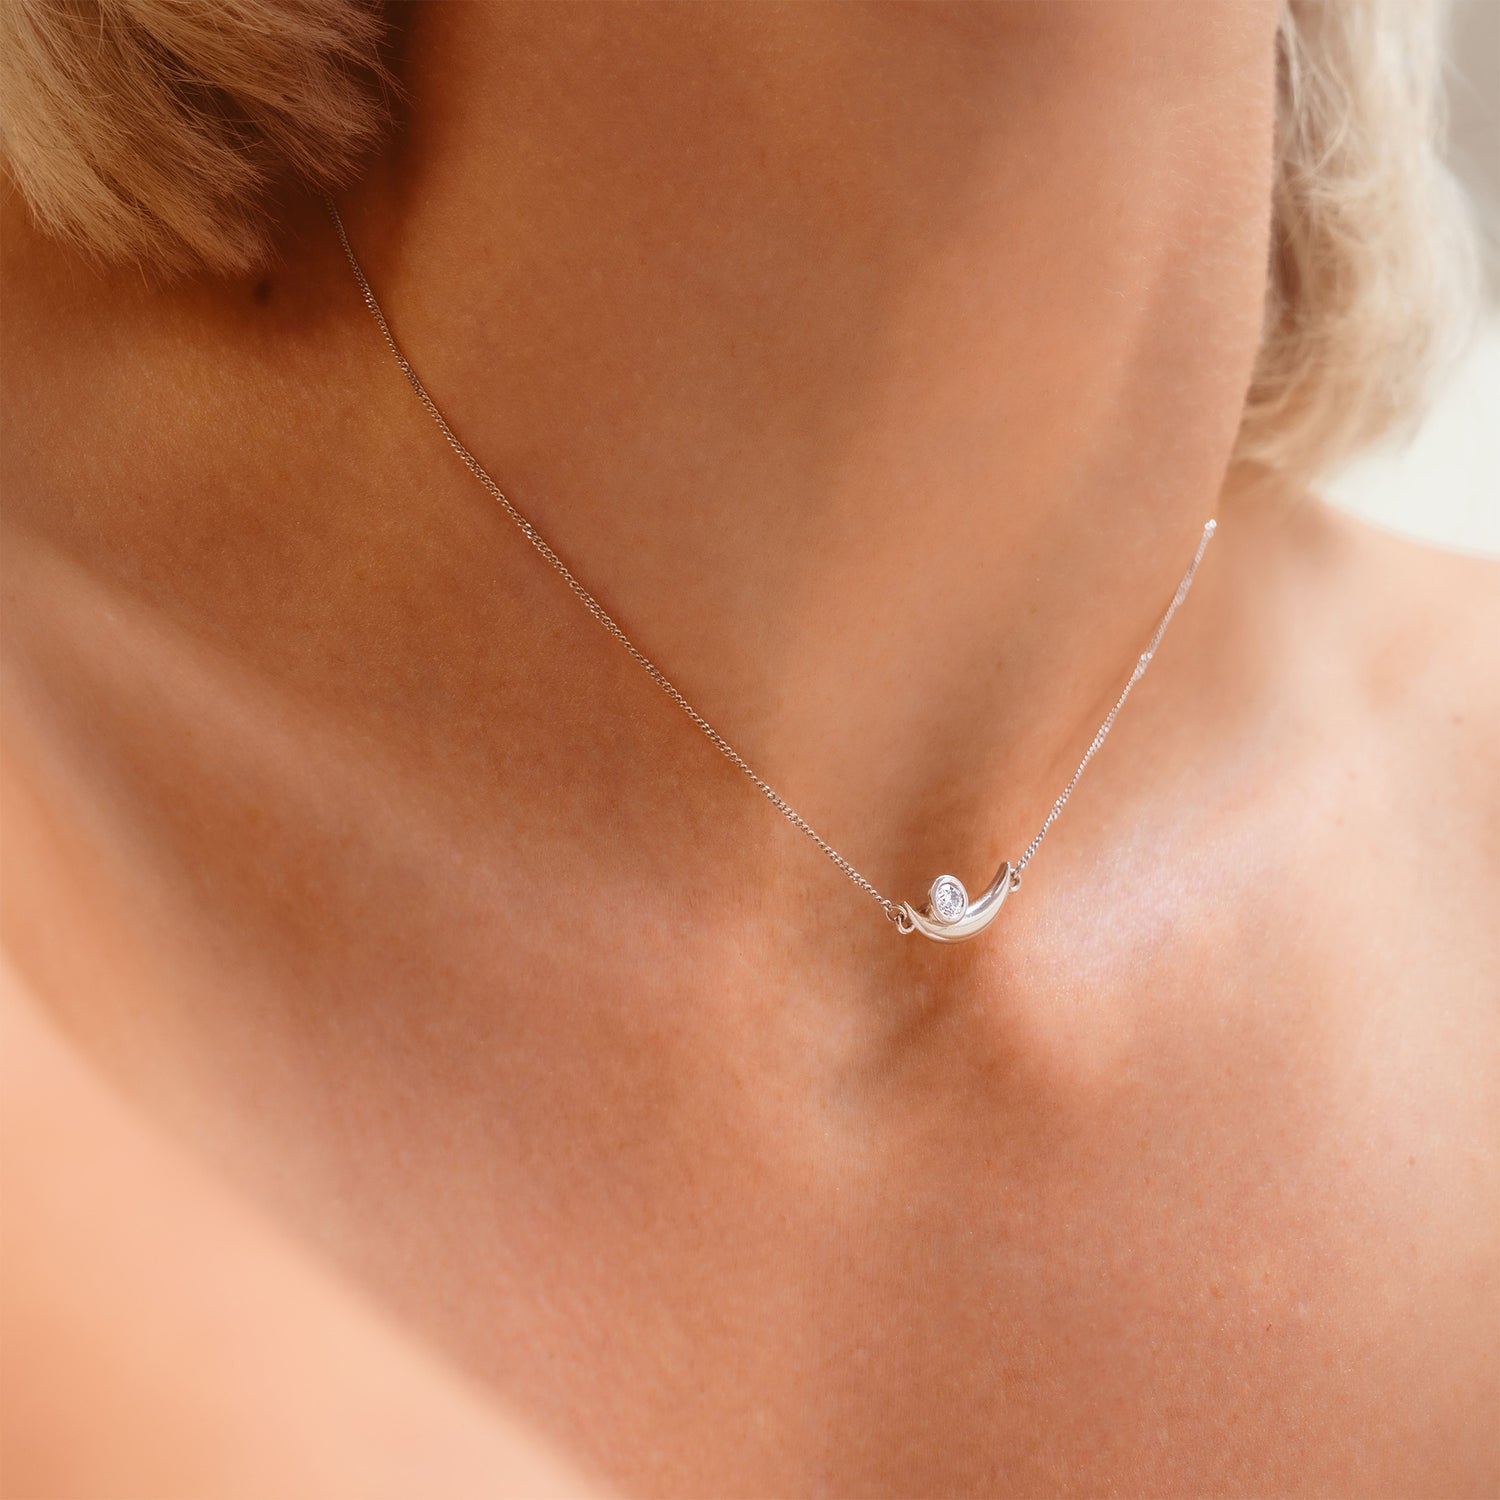 solid white gold crescent necklace with diamond on neck - AIANA jewellery Australia